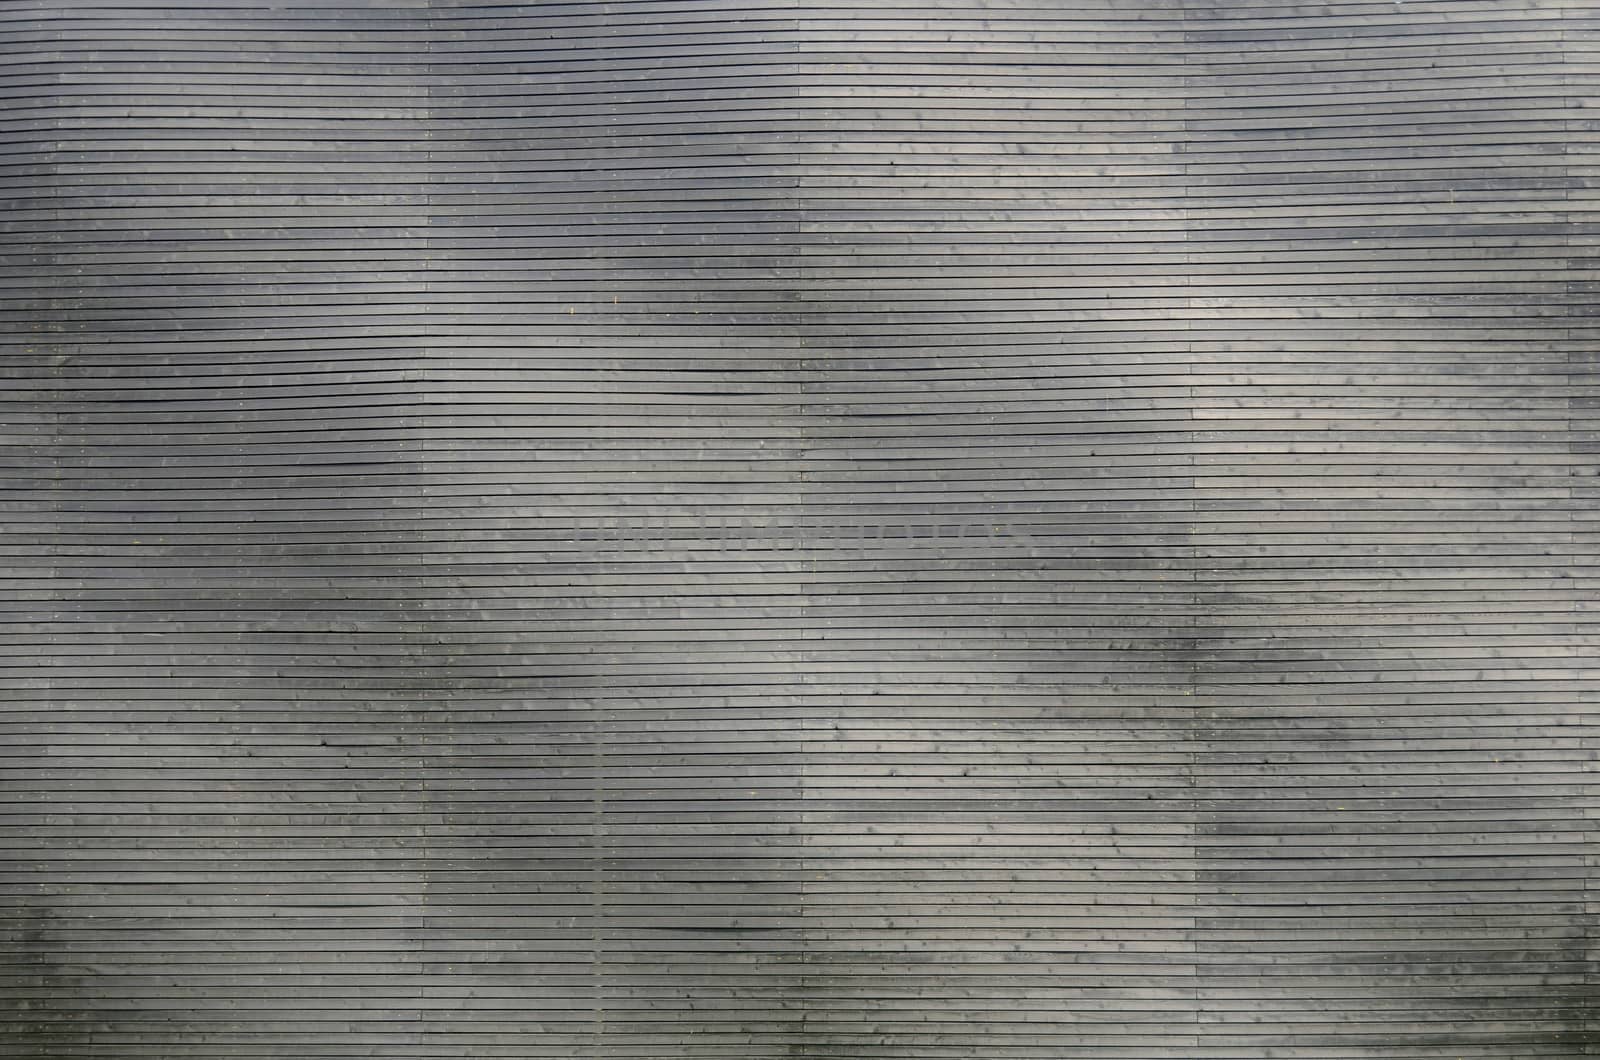 Abstract Background Texture Of An Uneven Wooden Wall